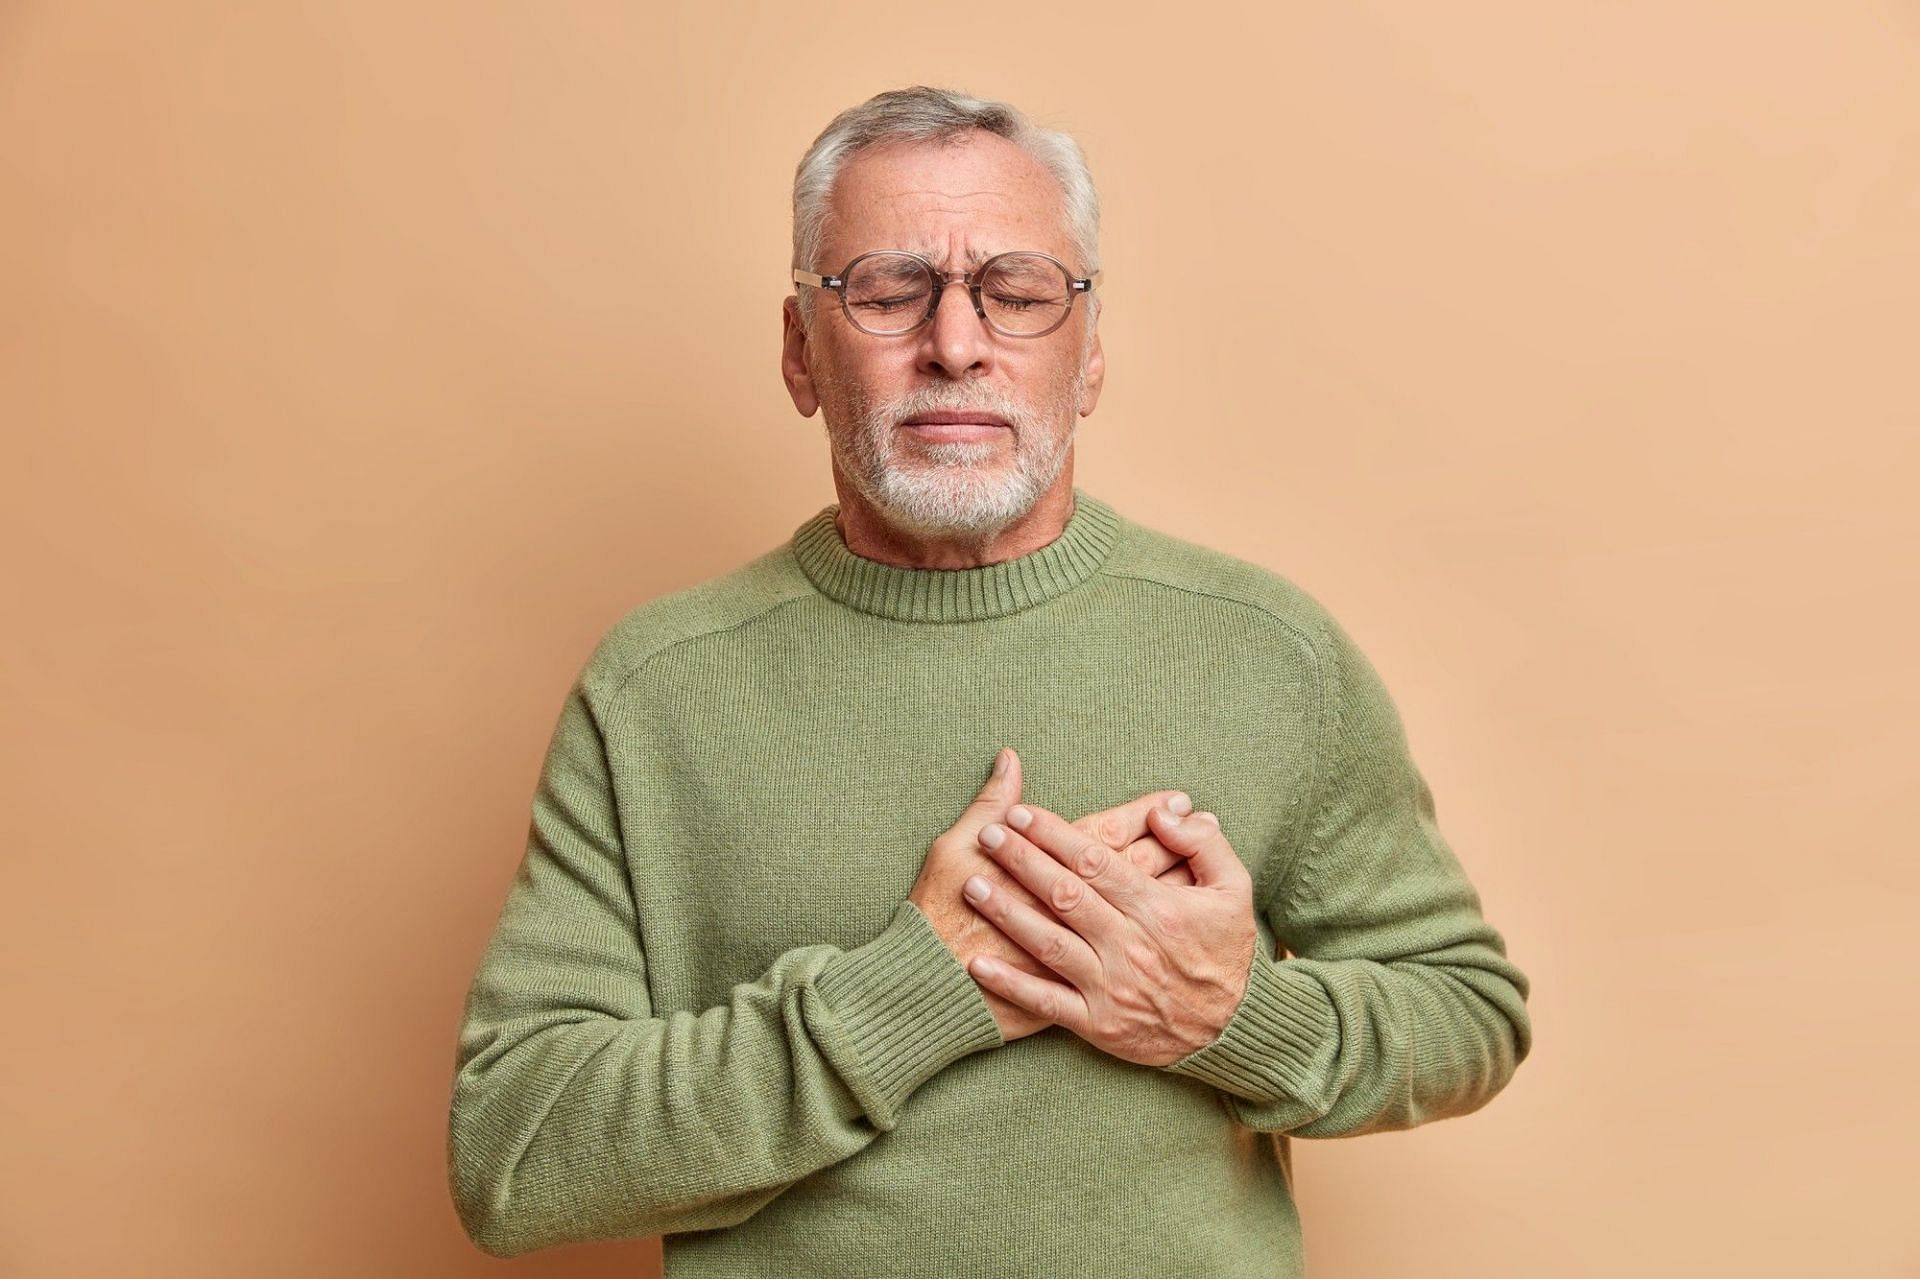 Chest pain when breathing can be because of underlying health conditions (Image by wayhomestudio on Freepik)